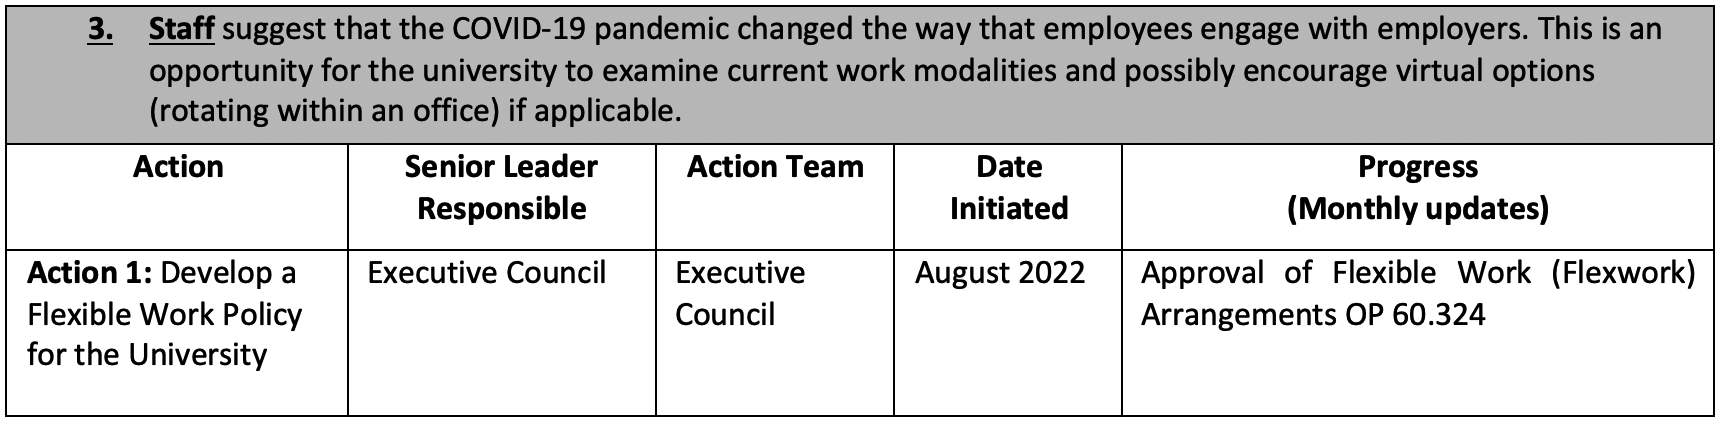 3.	Staff suggest that the COVID-19 pandemic changed the way that employees engage with employers. This is an opportunity for the university to examine current work modalities and possibly encourage virtual options (rotating within an office) if applicable.